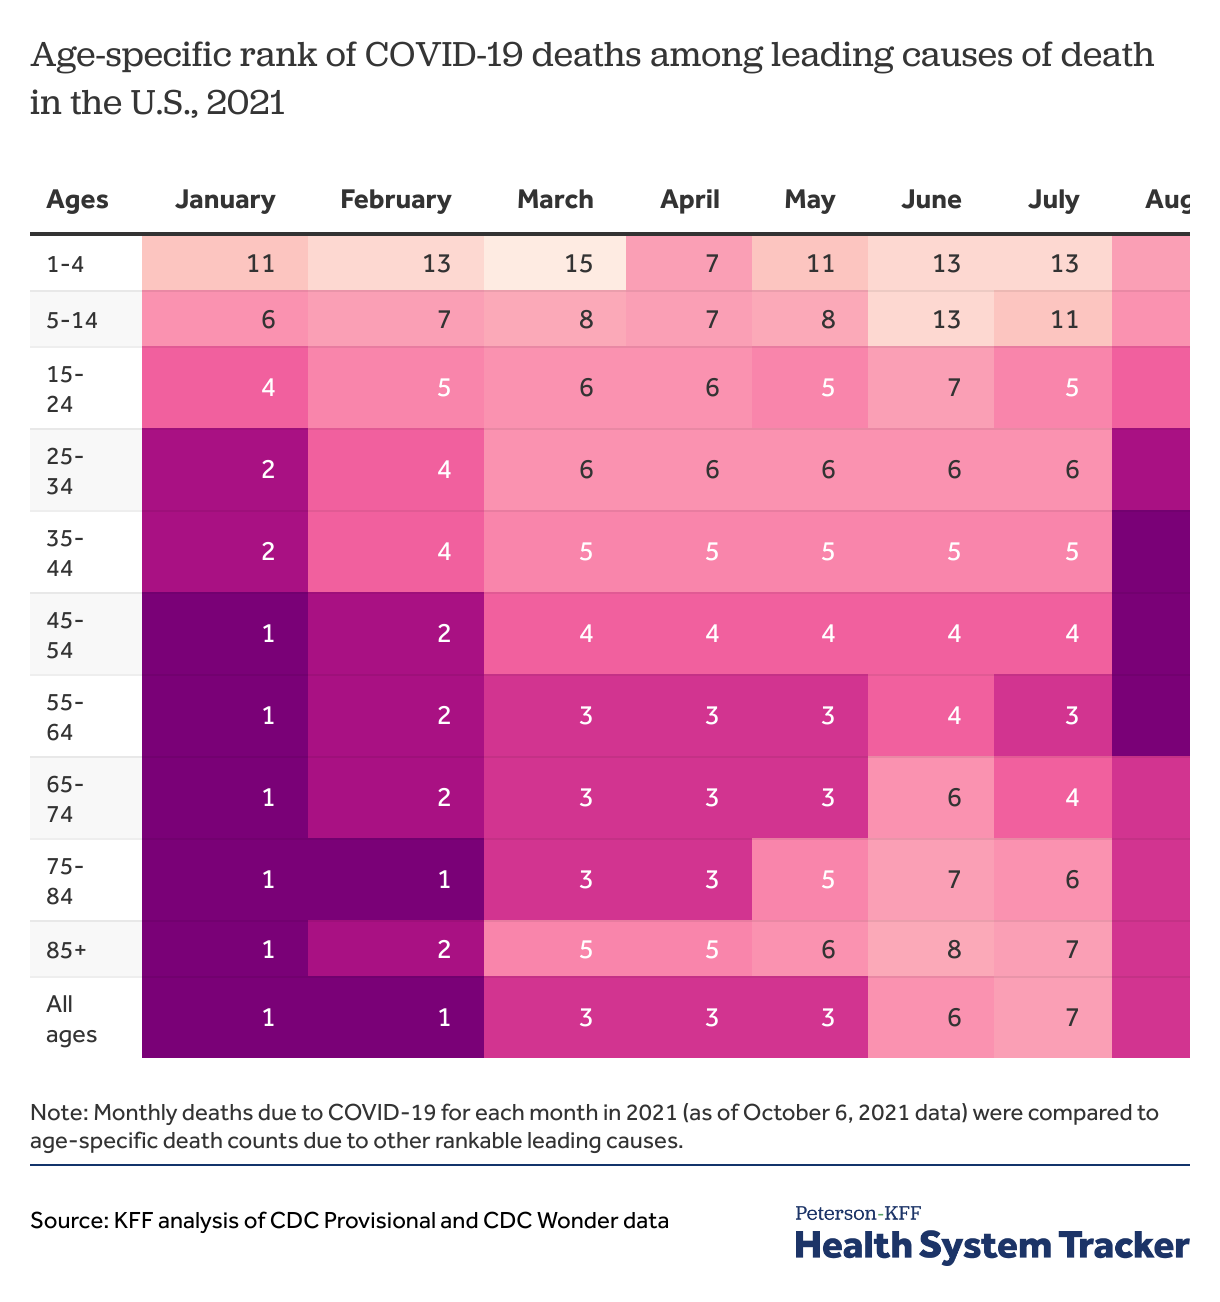 Covid 19 Continues To Be A Leading Cause Of Death In The U S In September 2021 Peterson Kff Health System Tracker